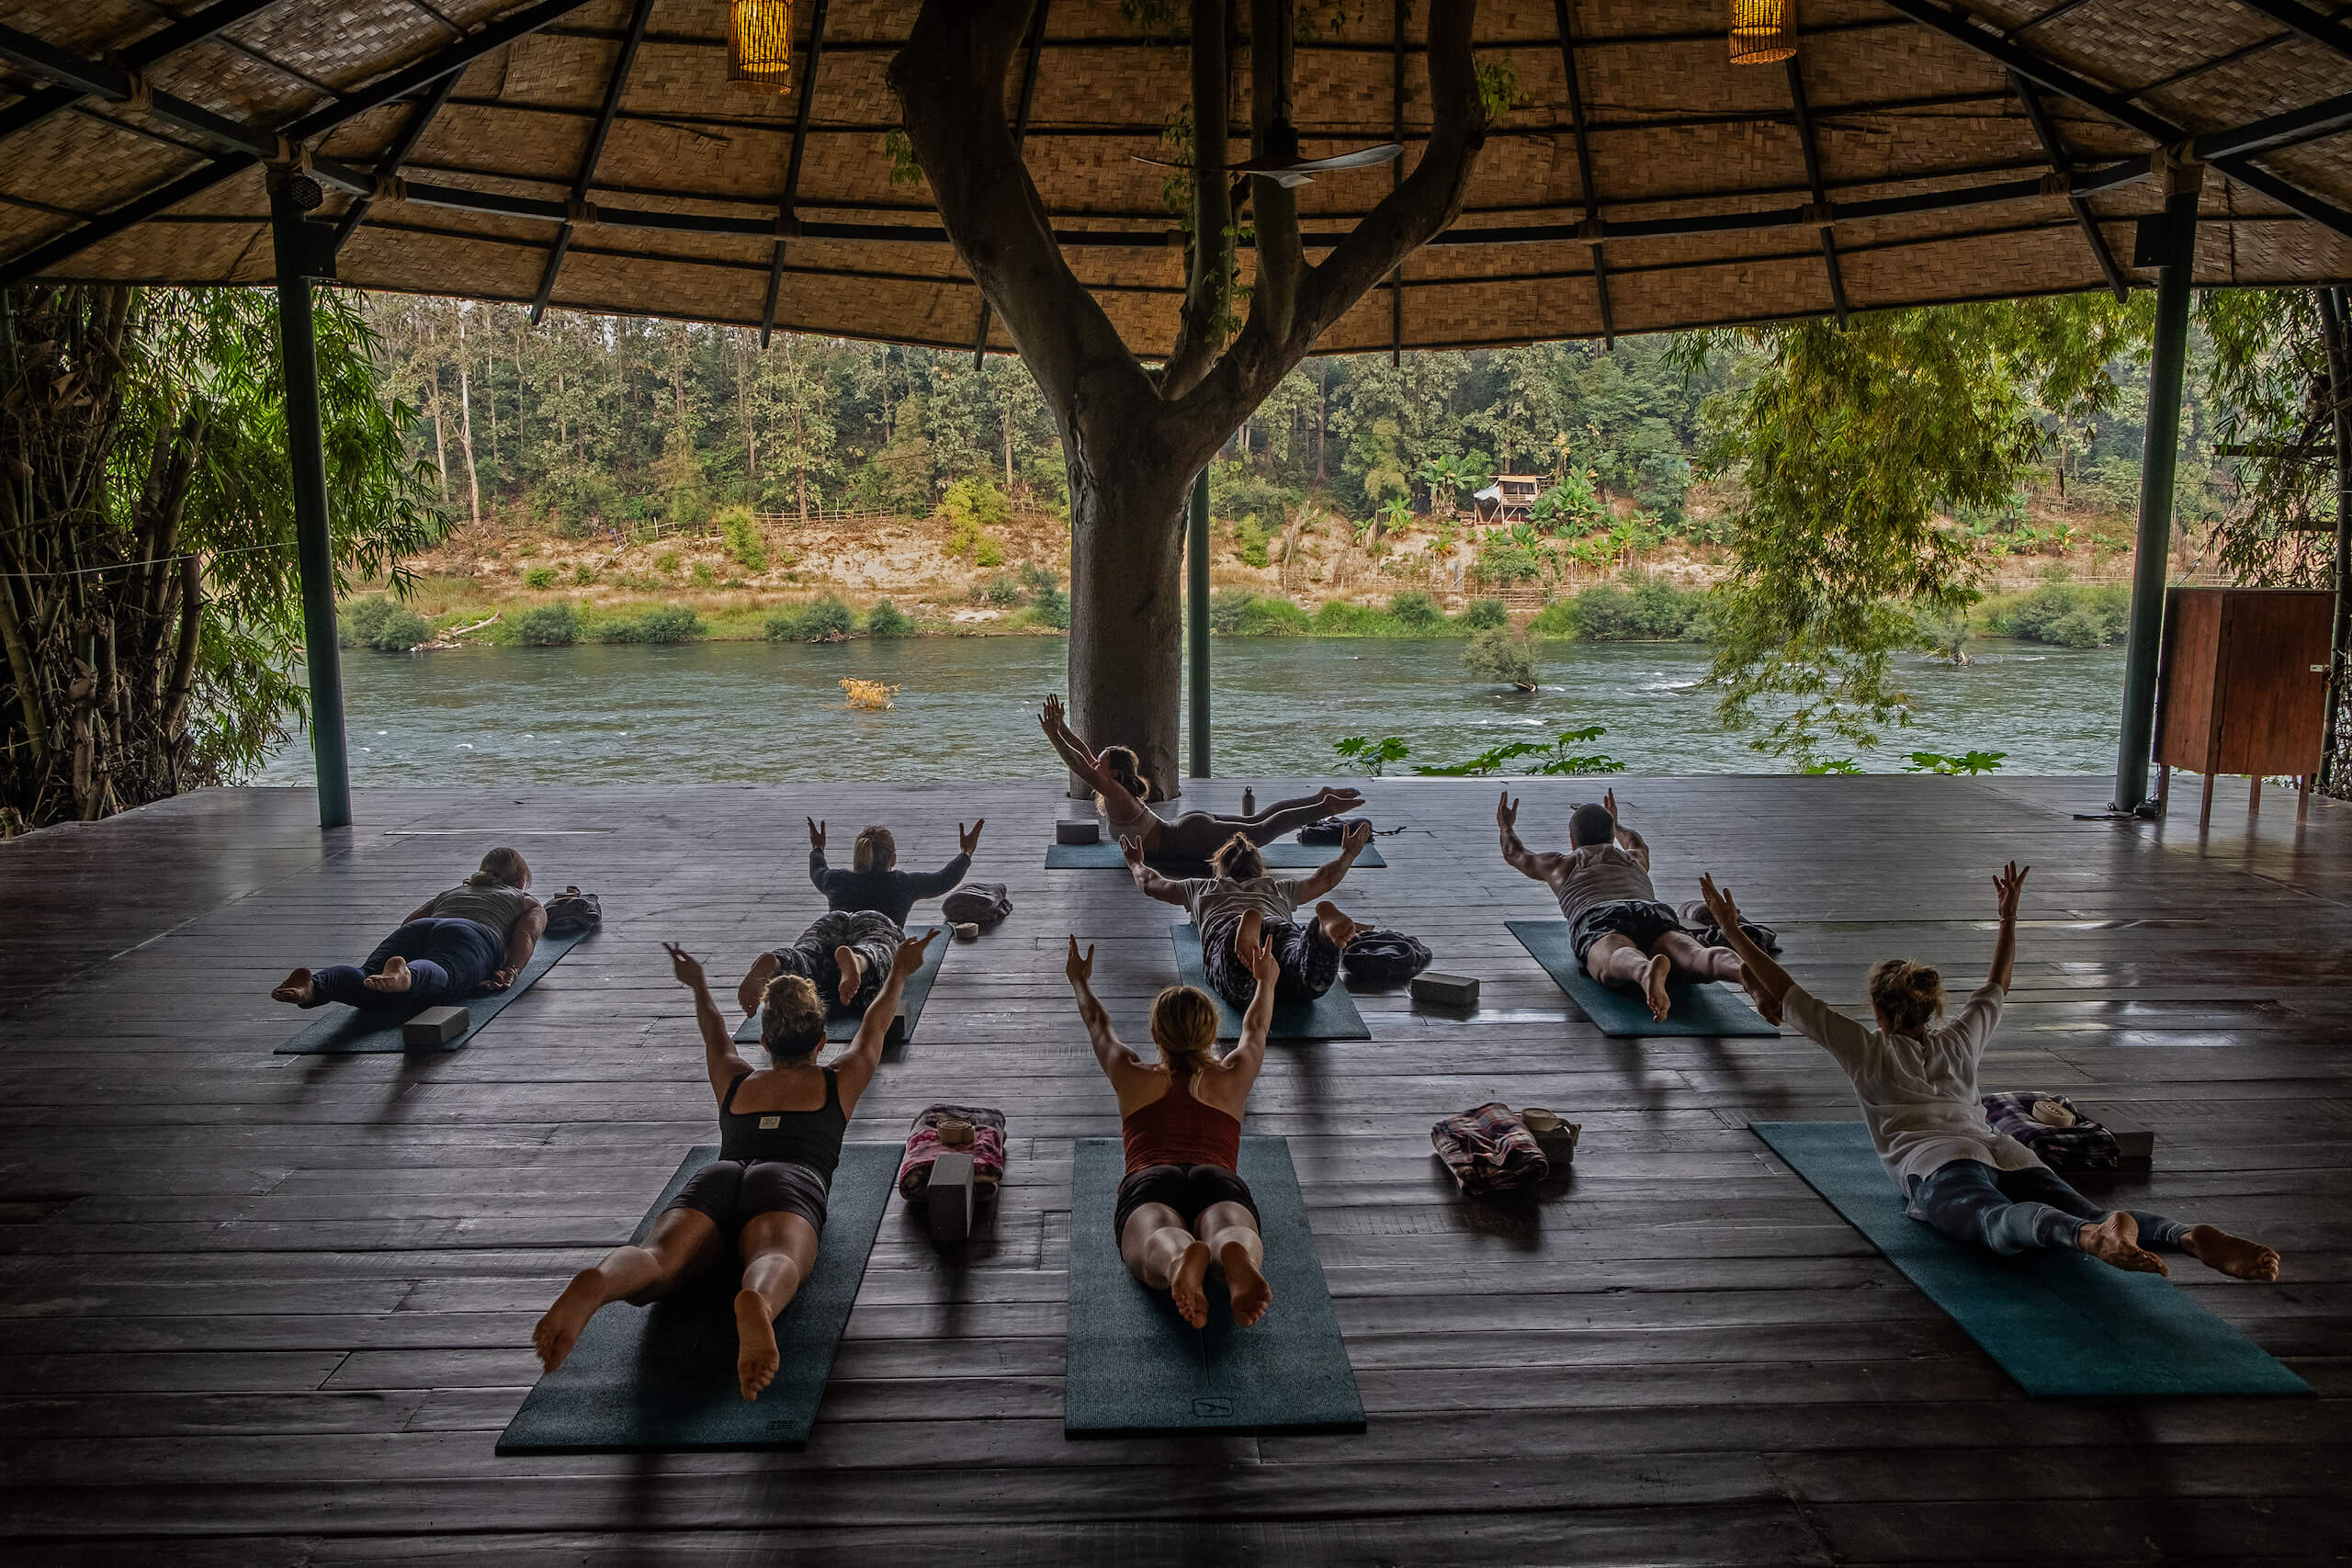 Group of people practicing yoga on mats in an open pavilion by the Namkhan river in Luang Prabang, with instructors leading the session at the front.